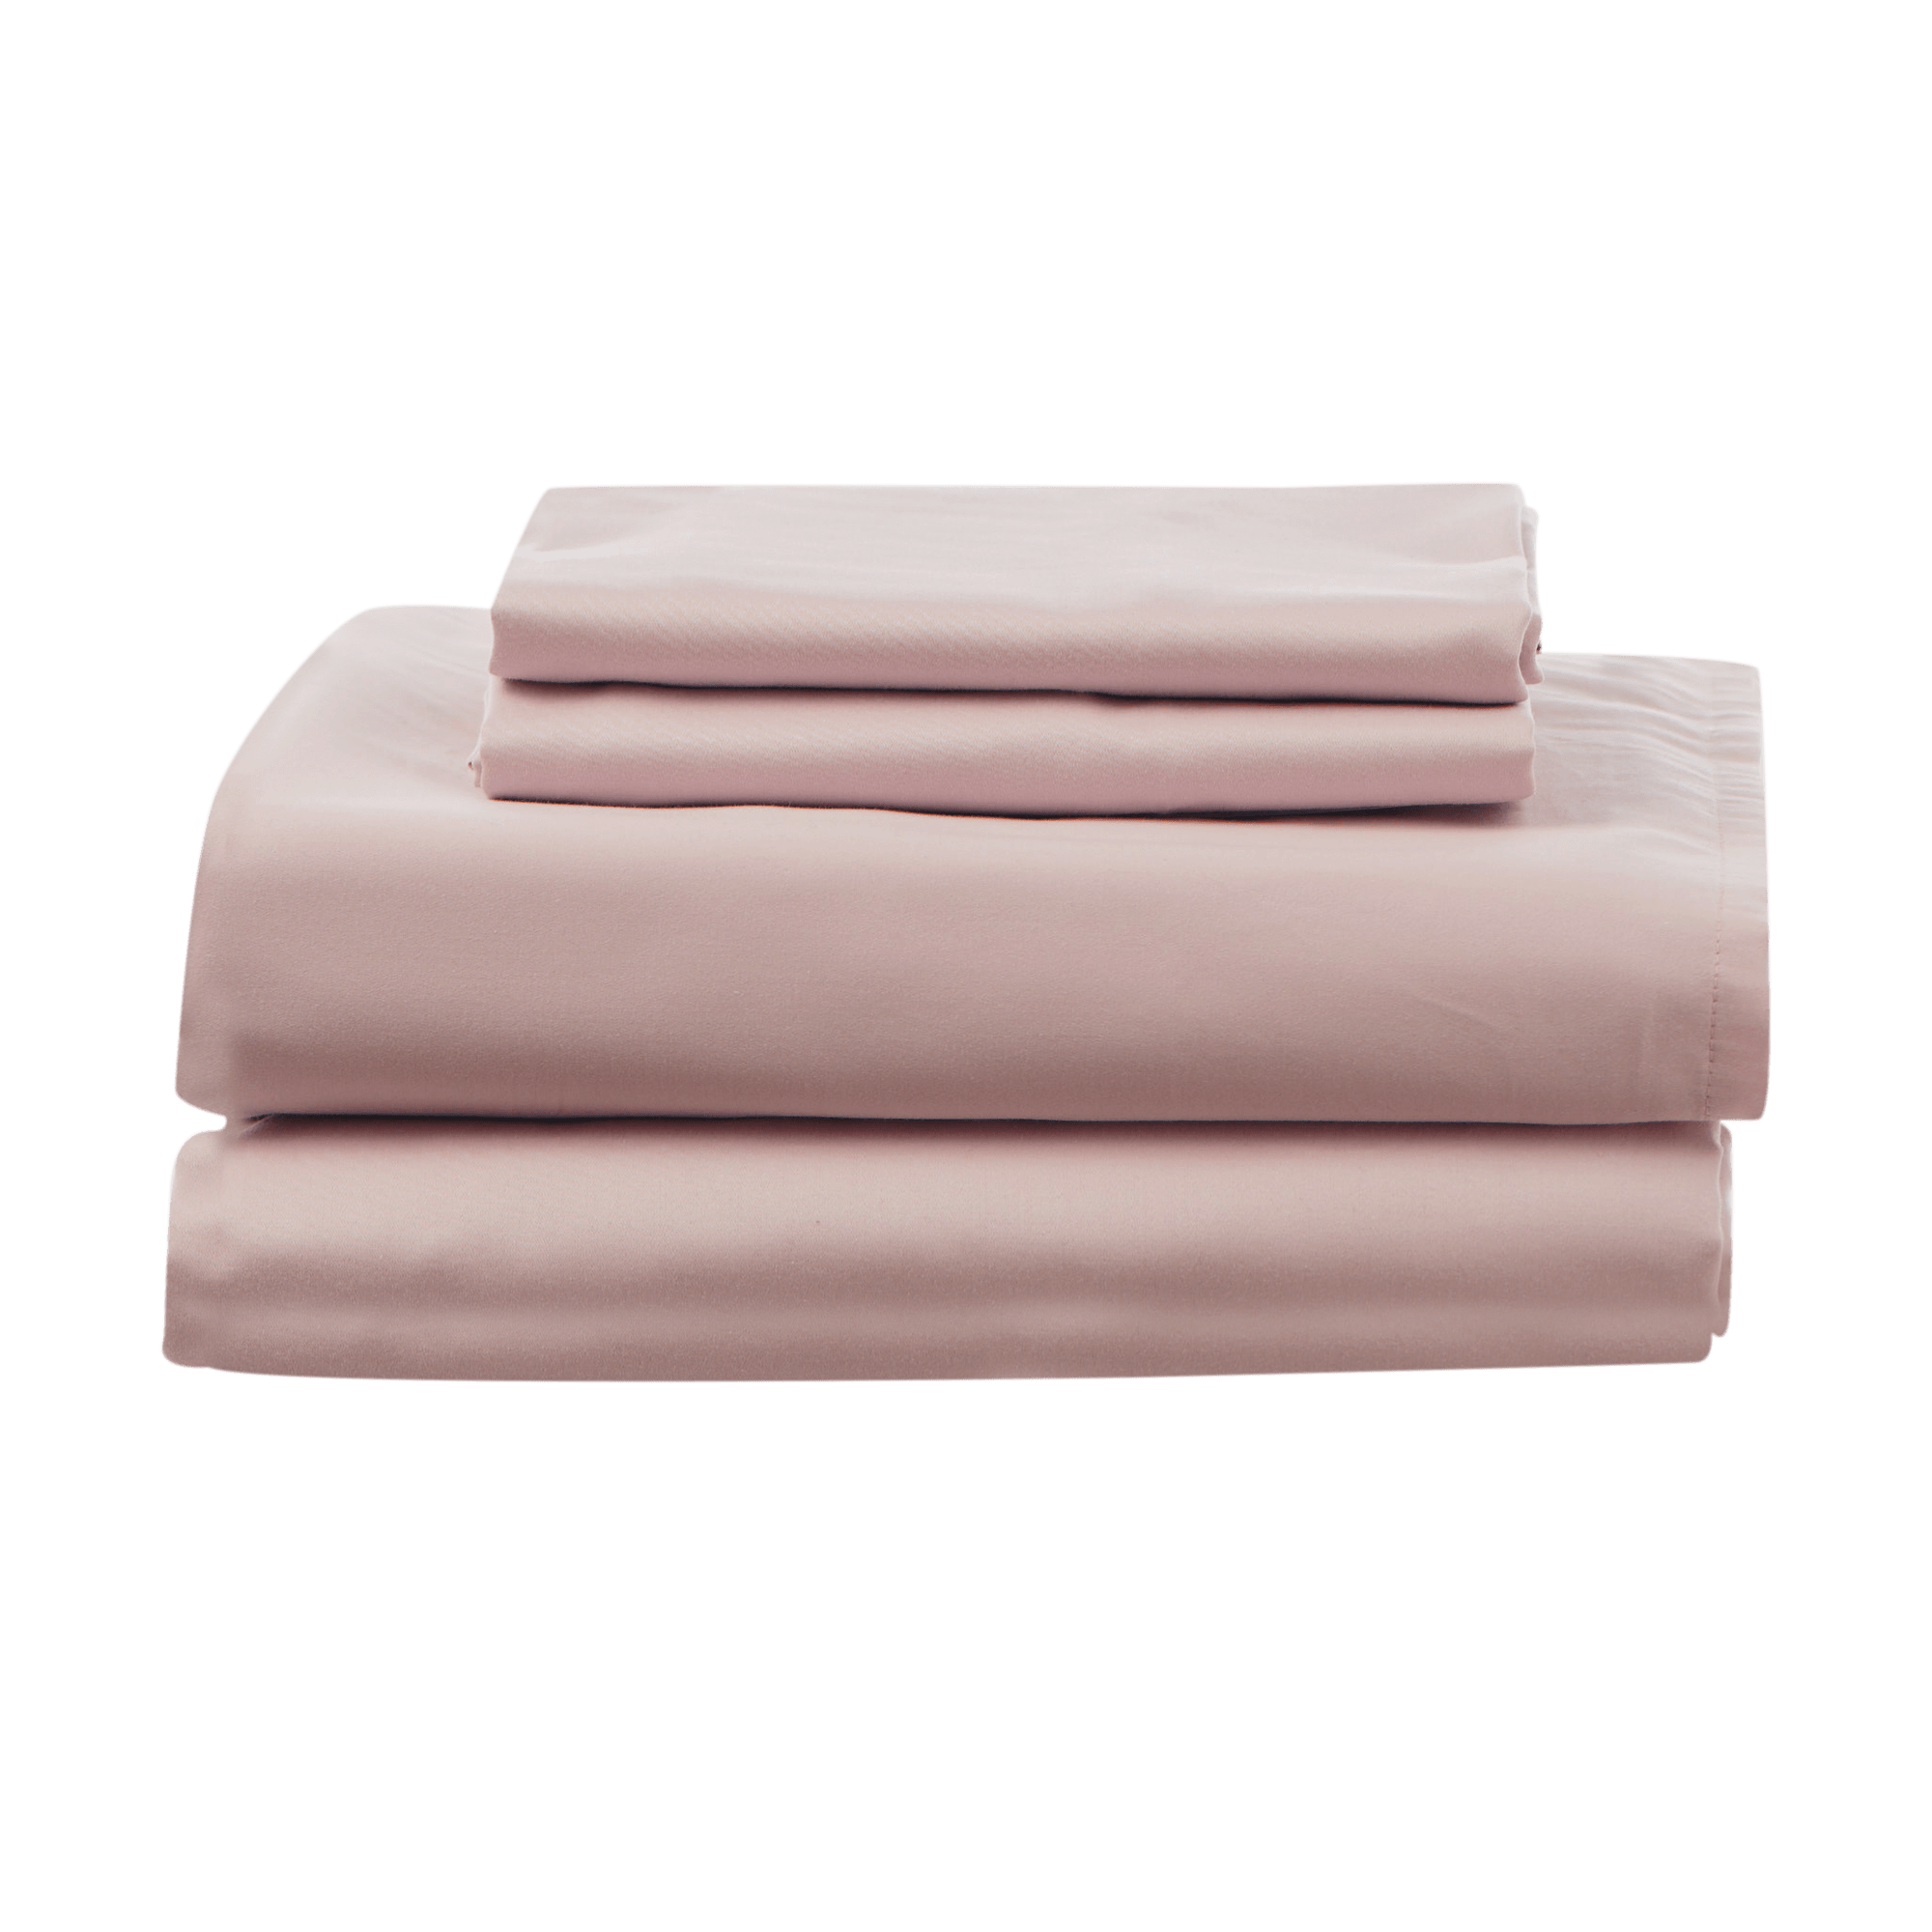 Dusty Rose Refined Sateen Sheet set 2 Pillow cases 1 Fitted sheet 1 Loose Sheet 